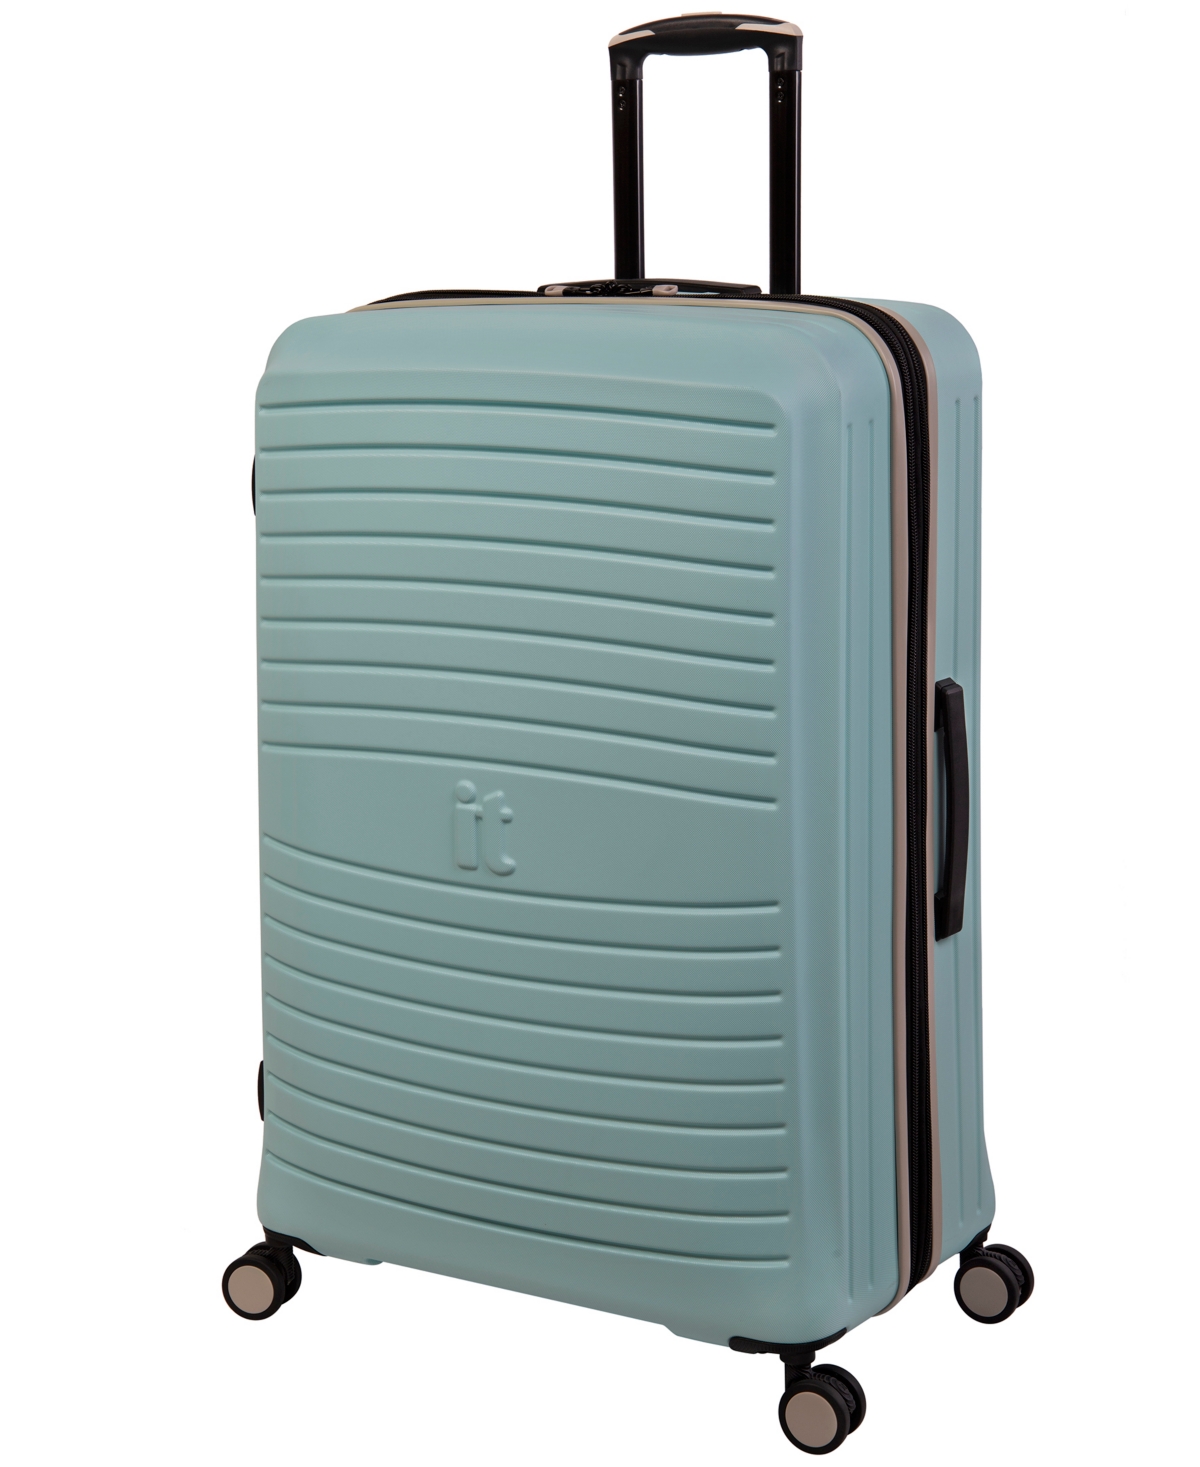 It Luggage 29" Hardside 8-wheel Expandable Spinner Luggage In Mint Eggshell